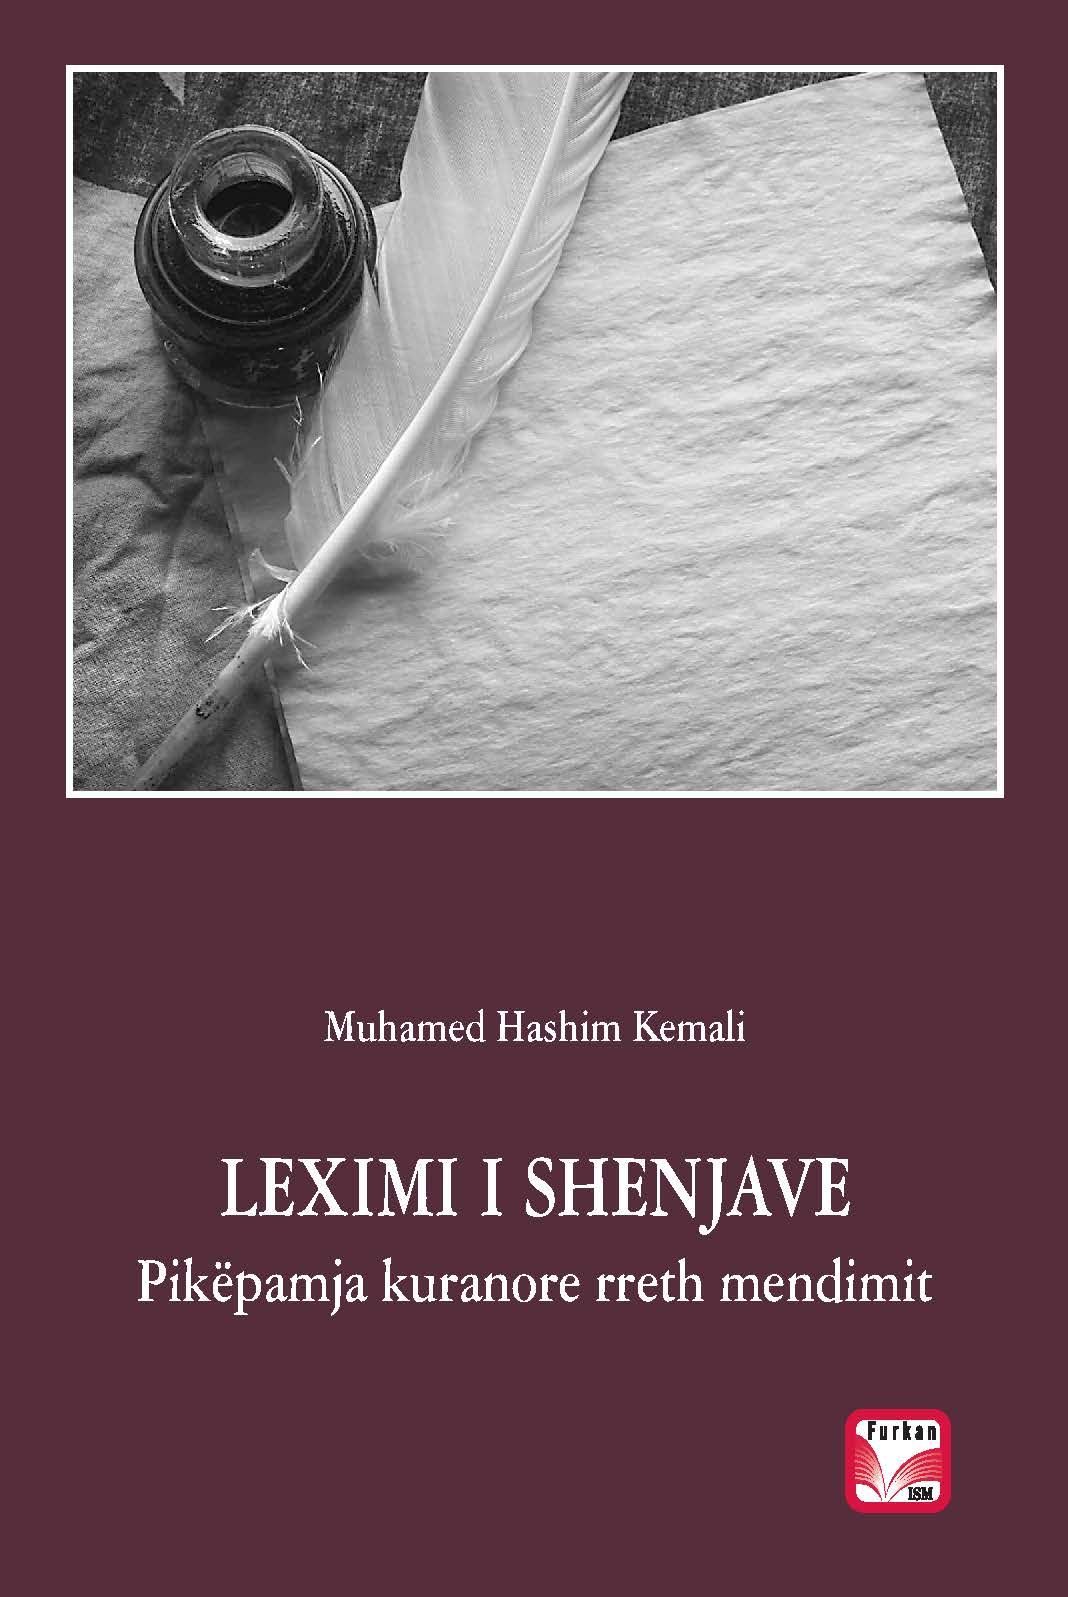 Albanian: Leximi i shenjave: Pikëpamja kuranore rreth mendimit (Reading the Signs: A Qur’anic Perspective on Thinking)